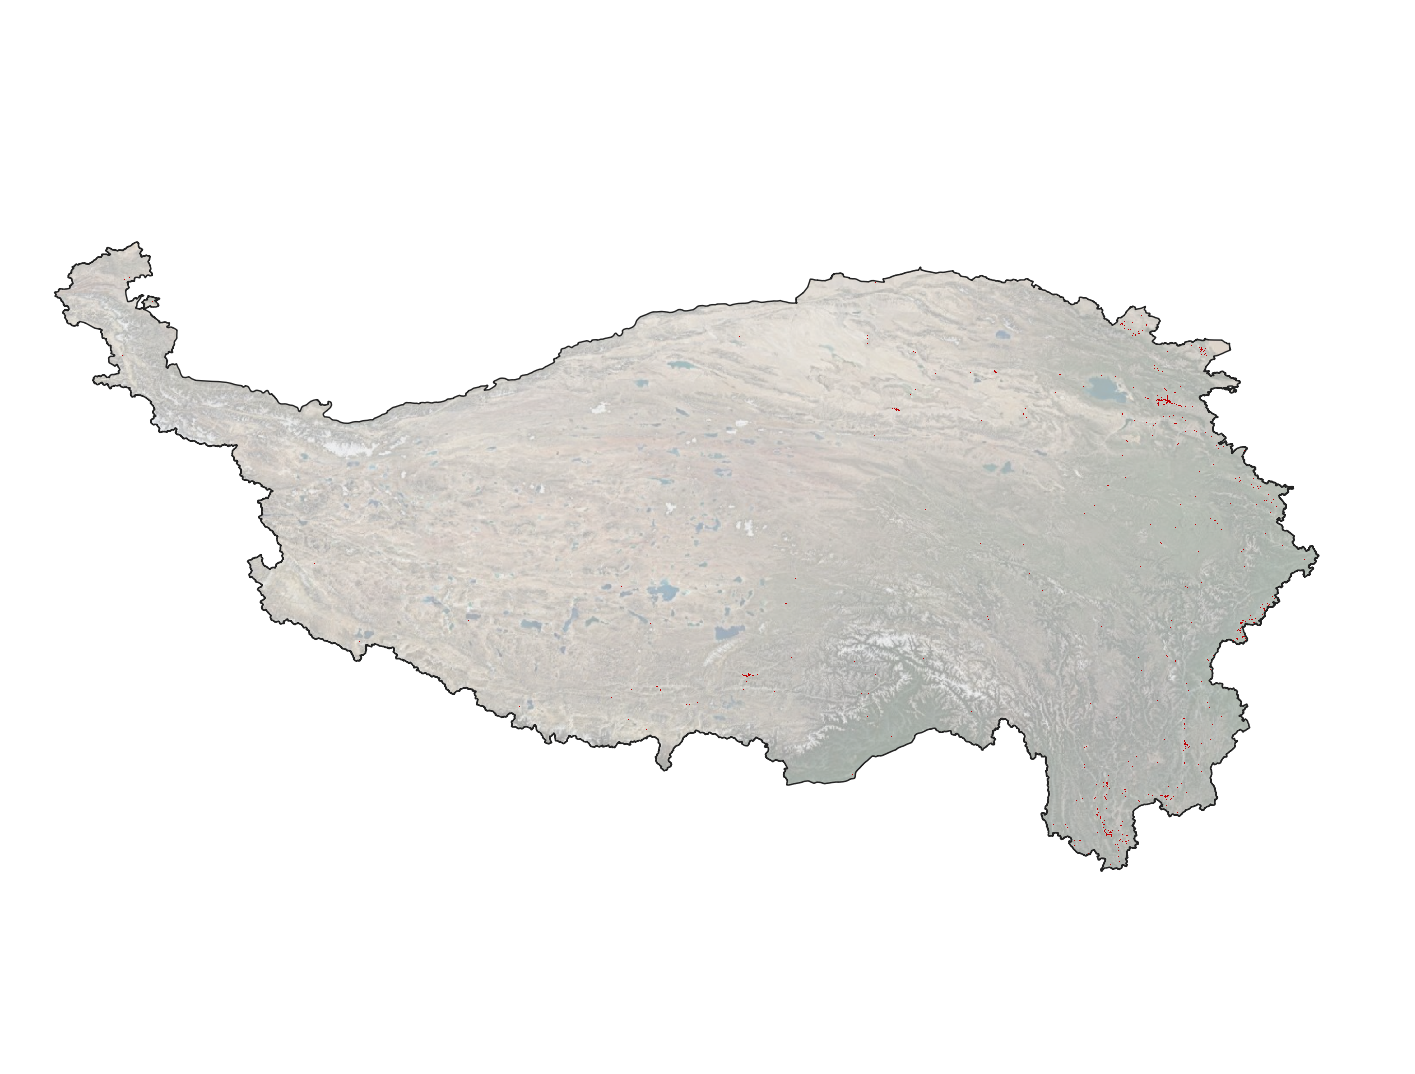 Impervious surface product of Qinghai-Tibet Plateau with 30m resolution (2015)